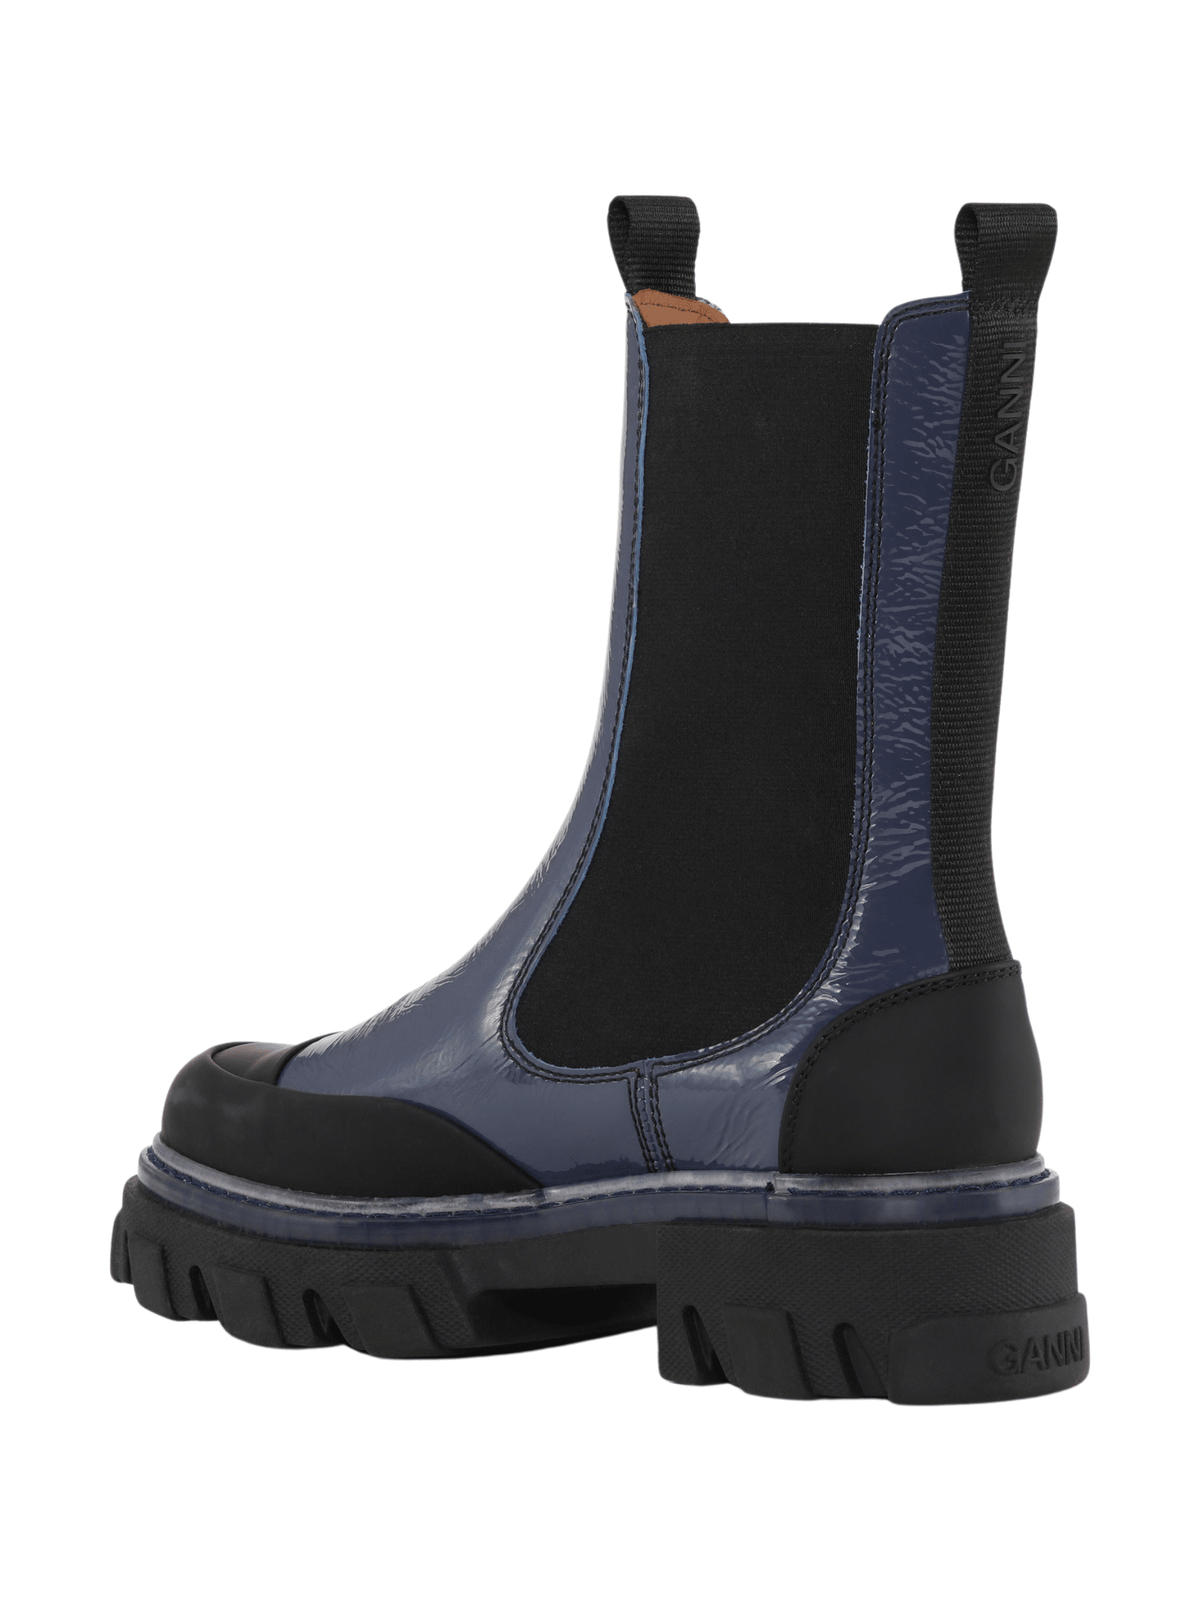 Naplack Cleated Mid Chelsea Boot / Navy Womens GANNI 